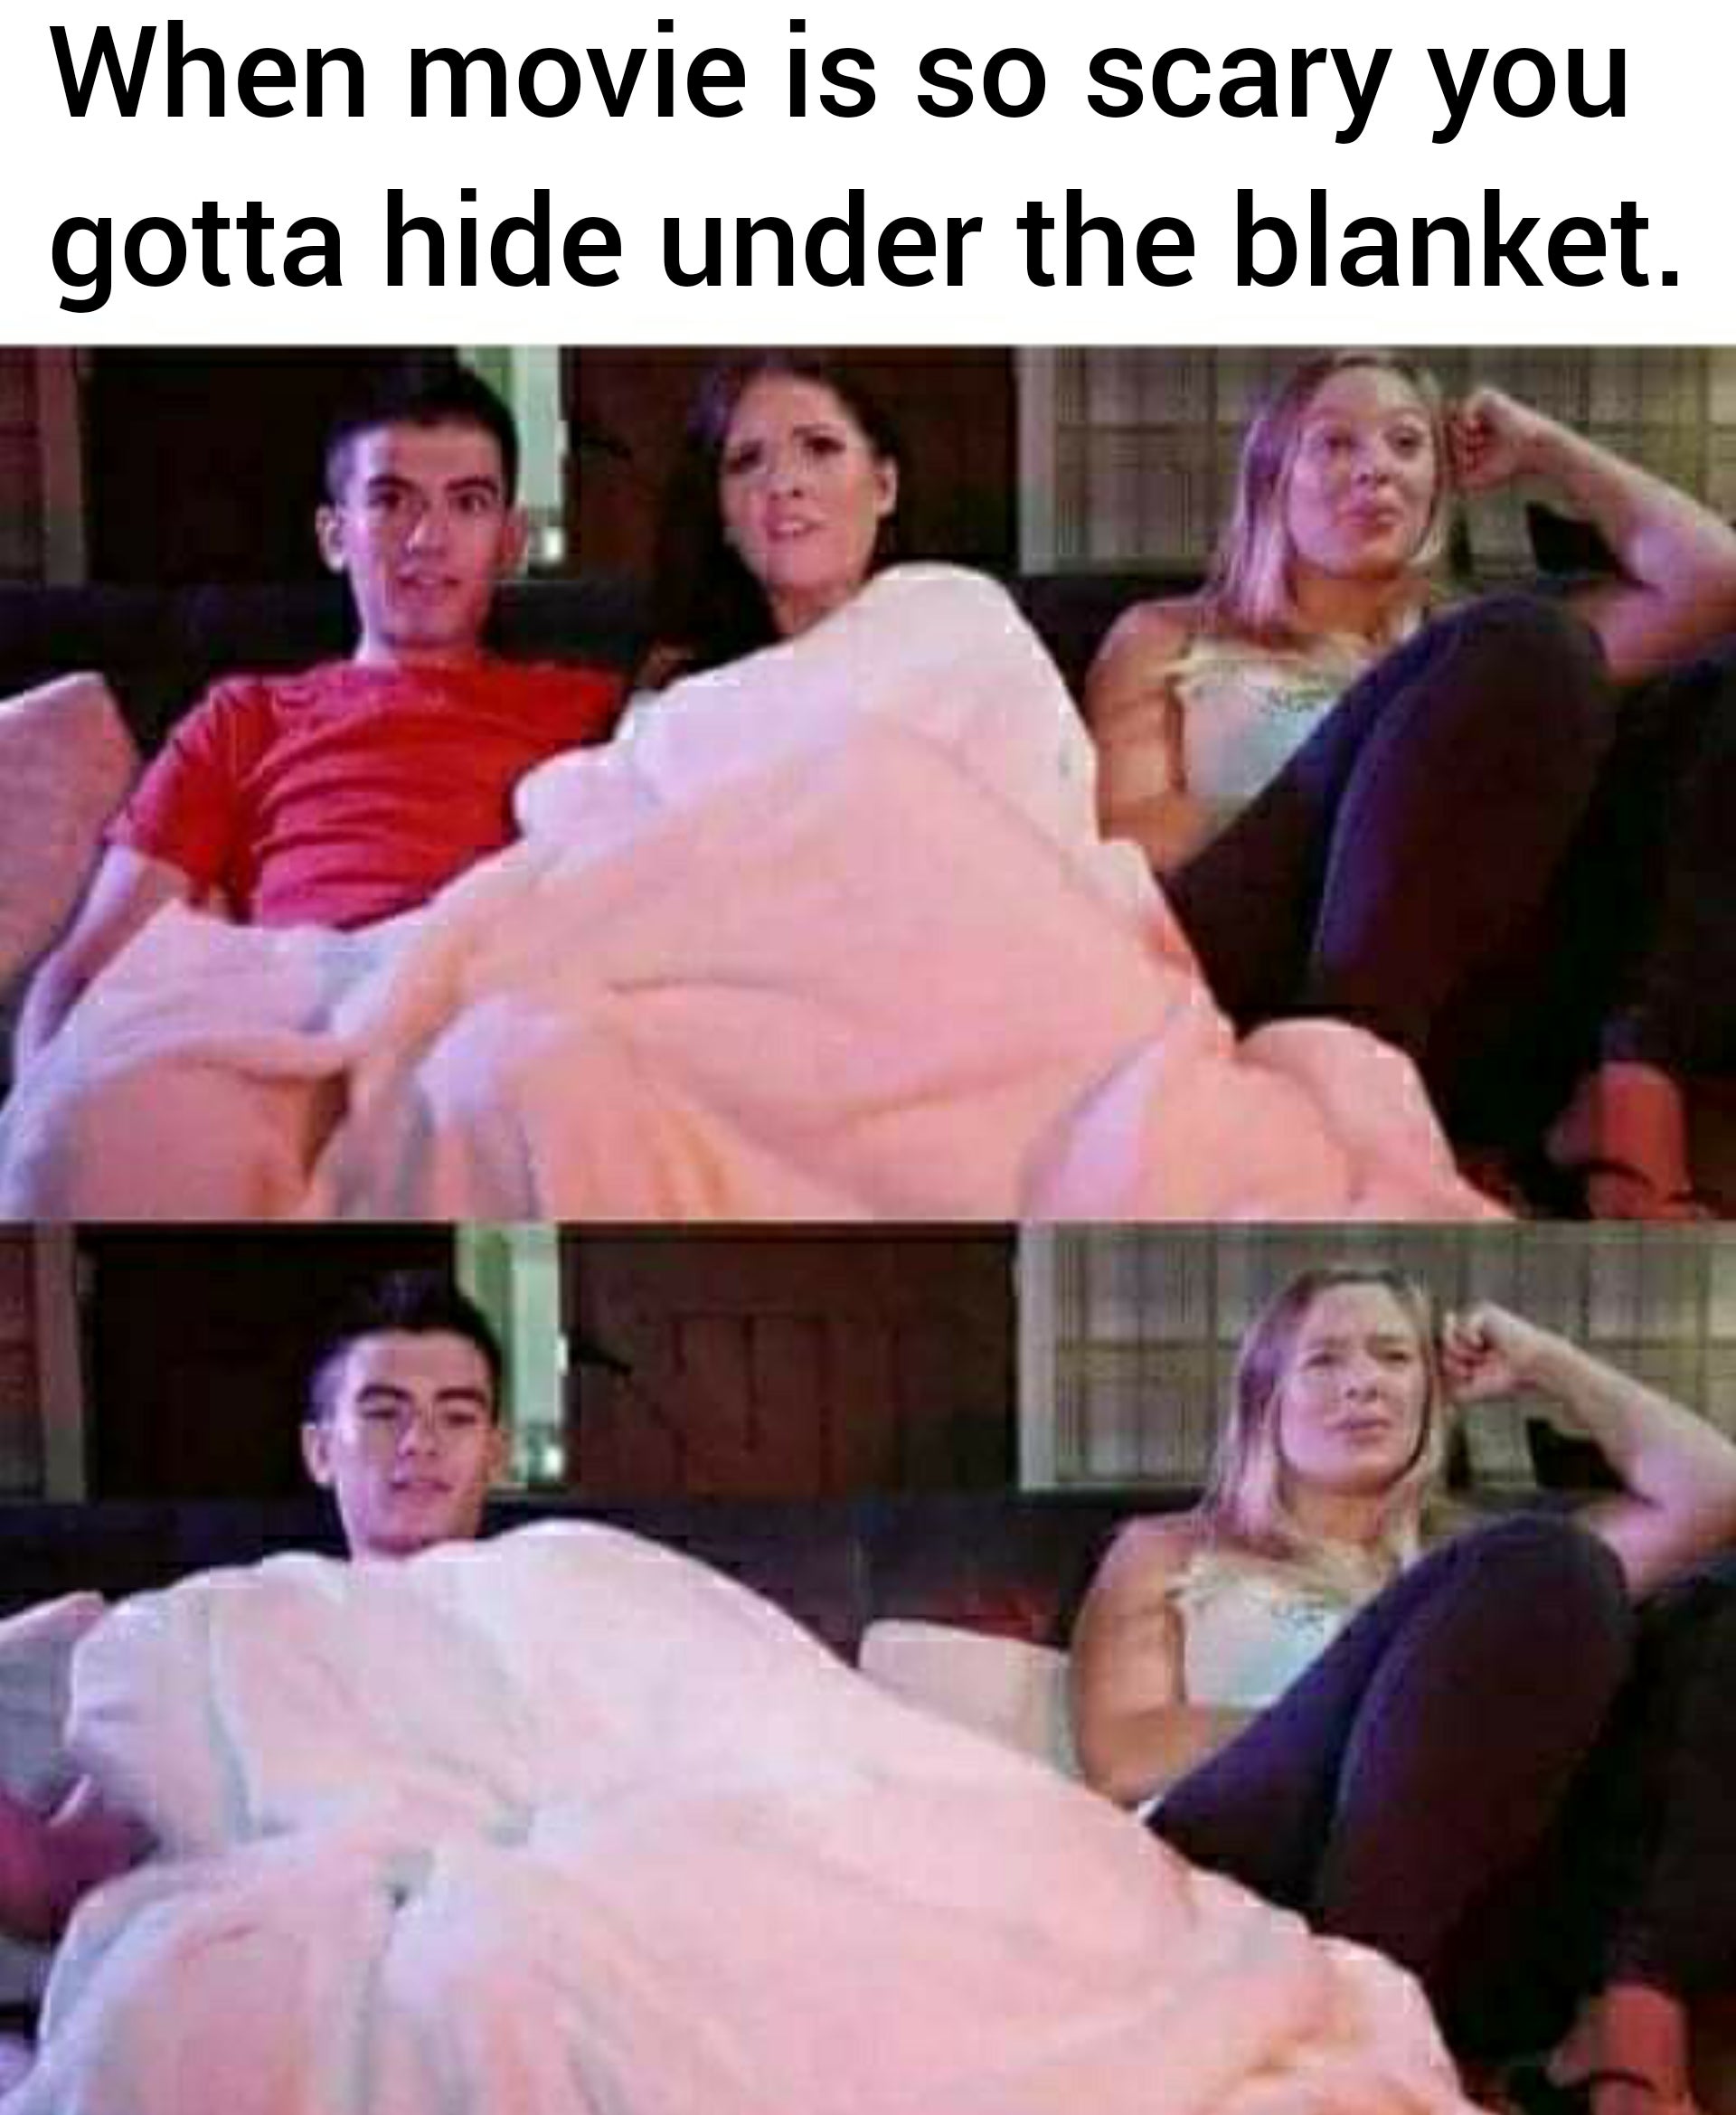 your cousin gets afraid of horror movie - When movie is so scary you gotta hide under the blanket.